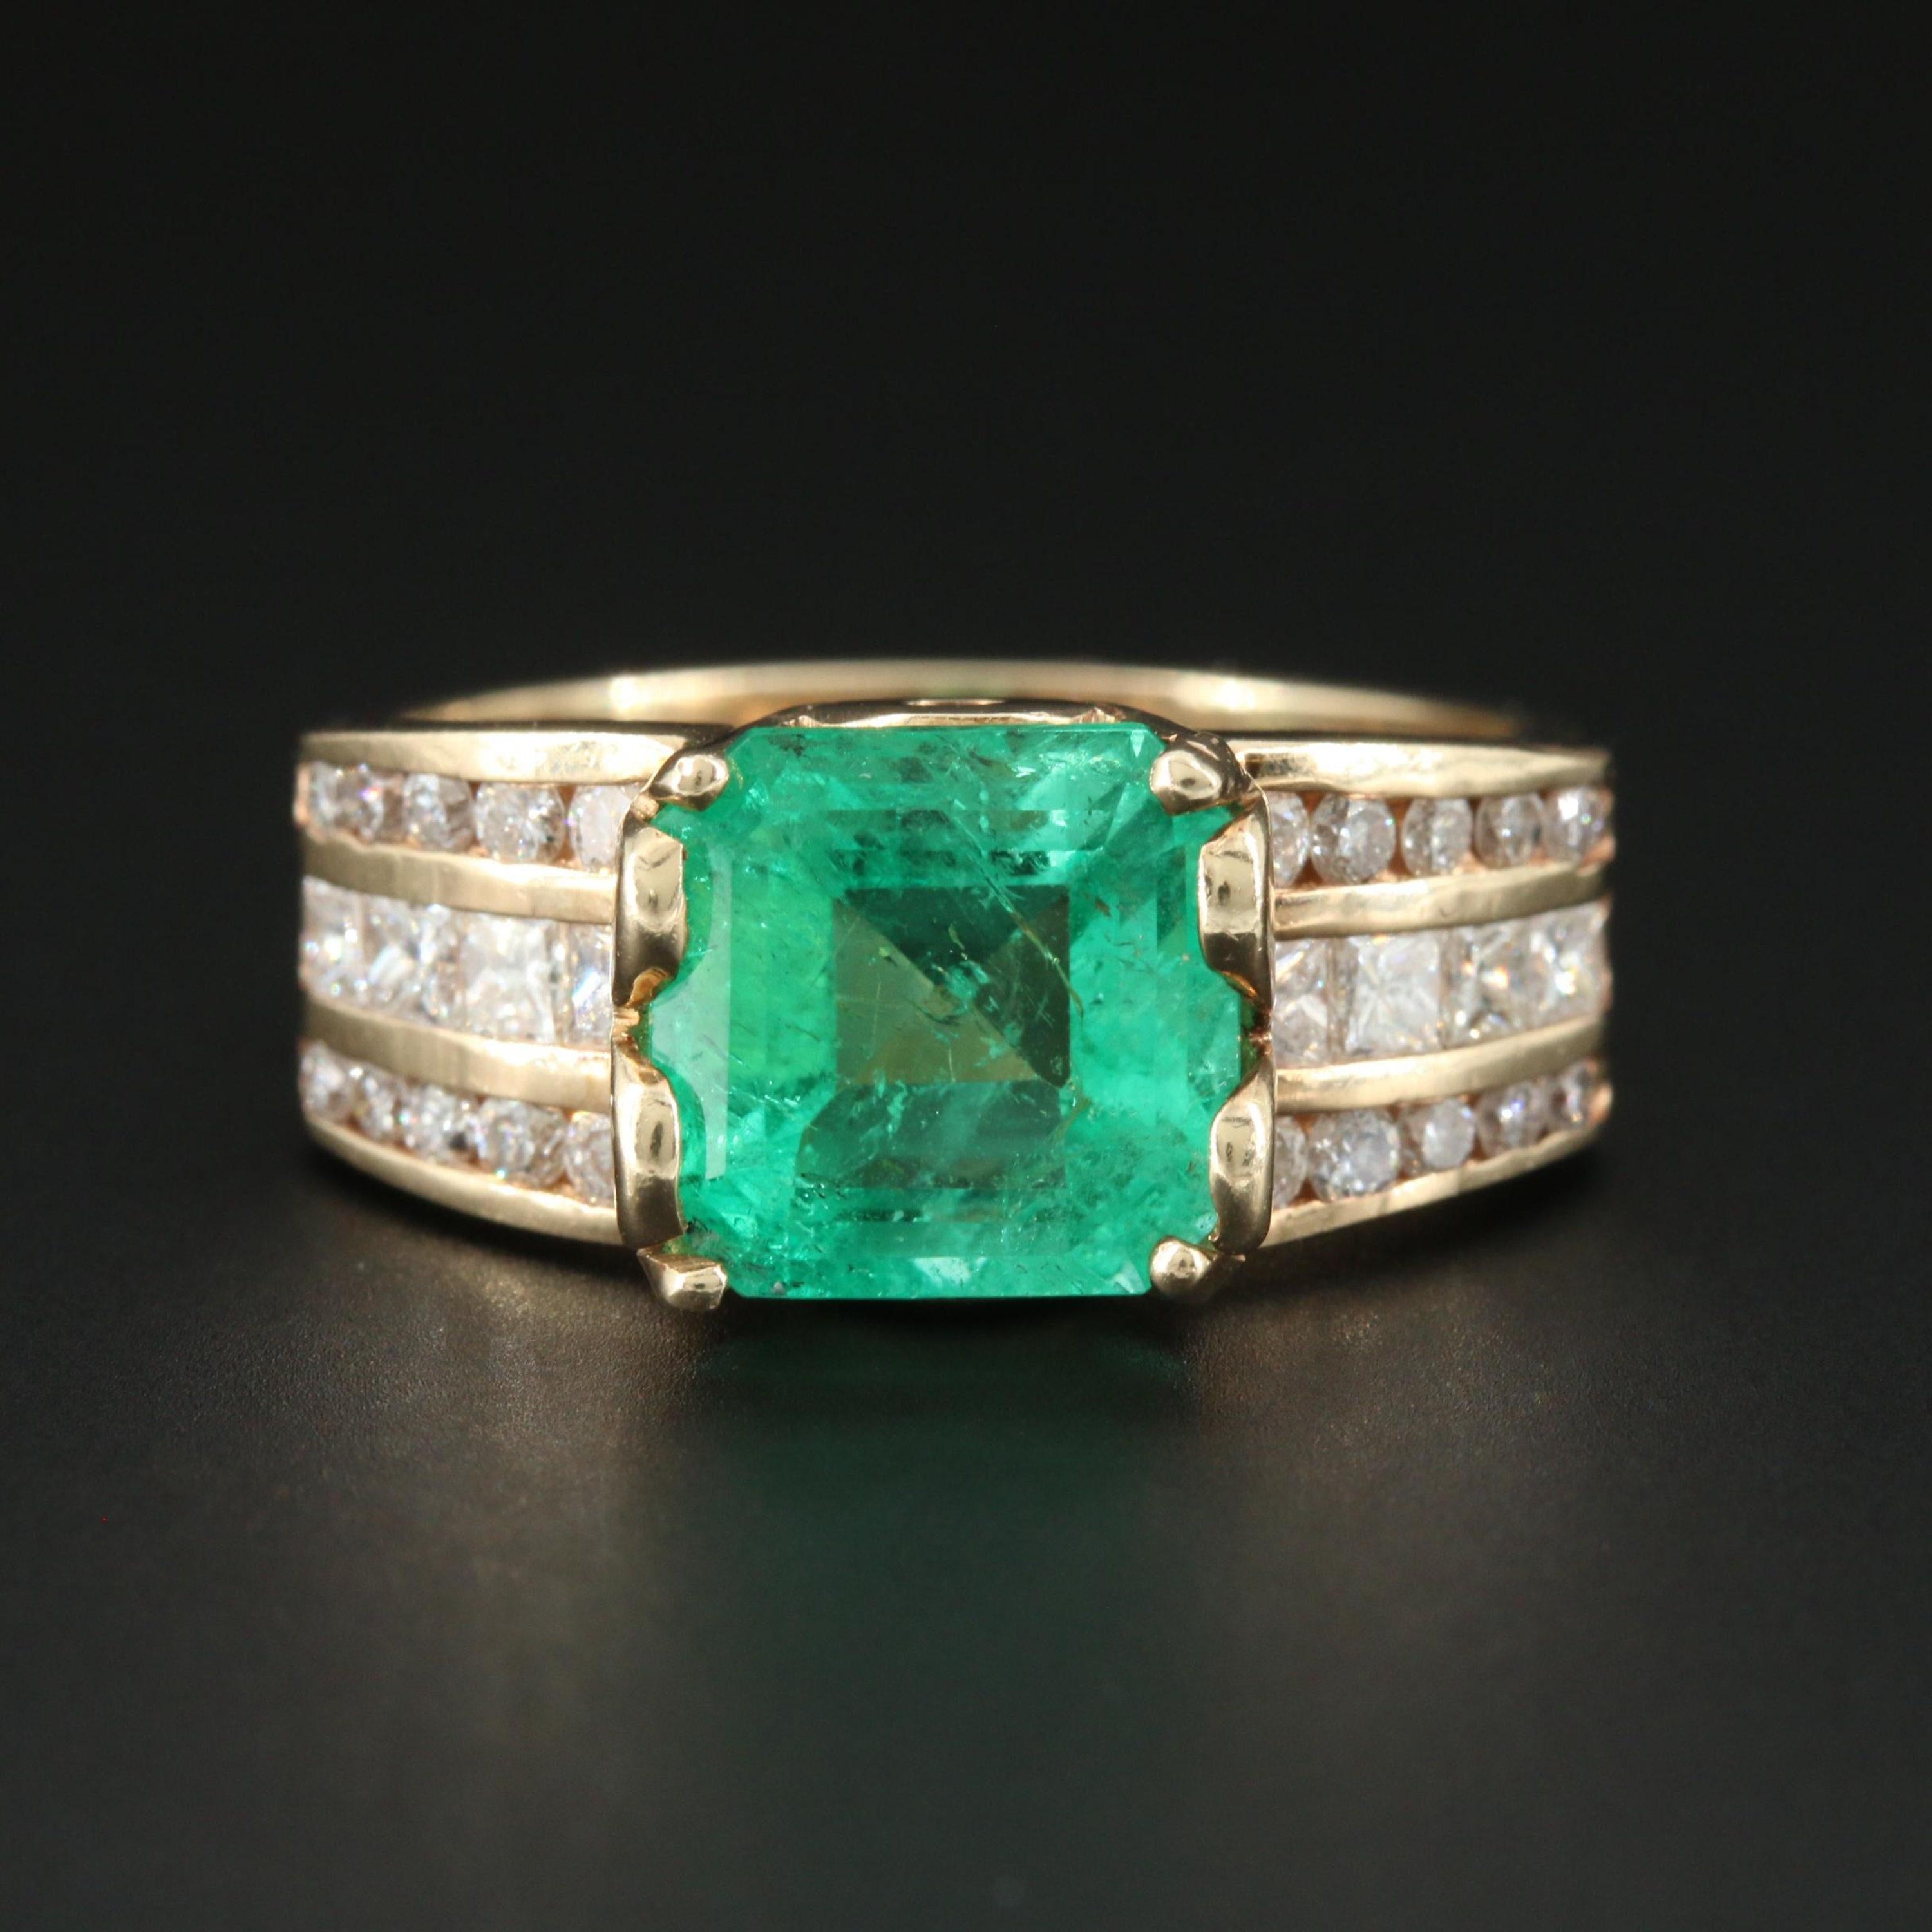 For Sale:  Art Deco 3 Carat Natural Emerald Diamond Engagement Ring, 18K Gold Band Ring 6